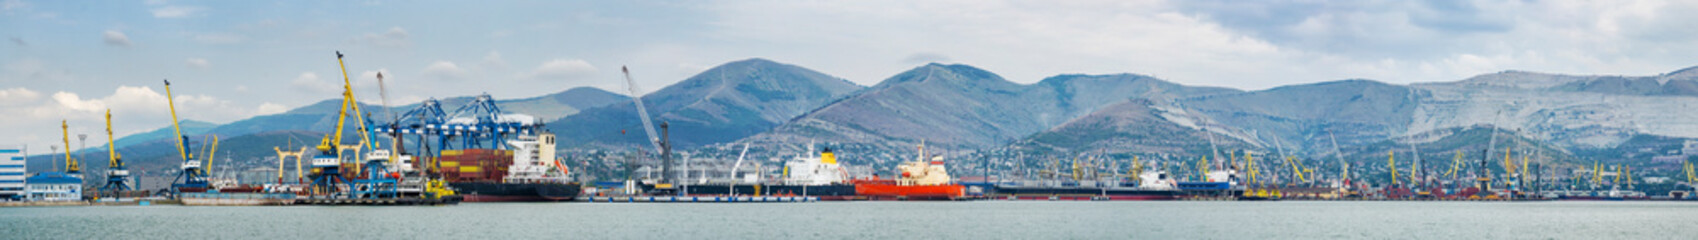 Sea, commercial, industrial port in the highlands, panorama